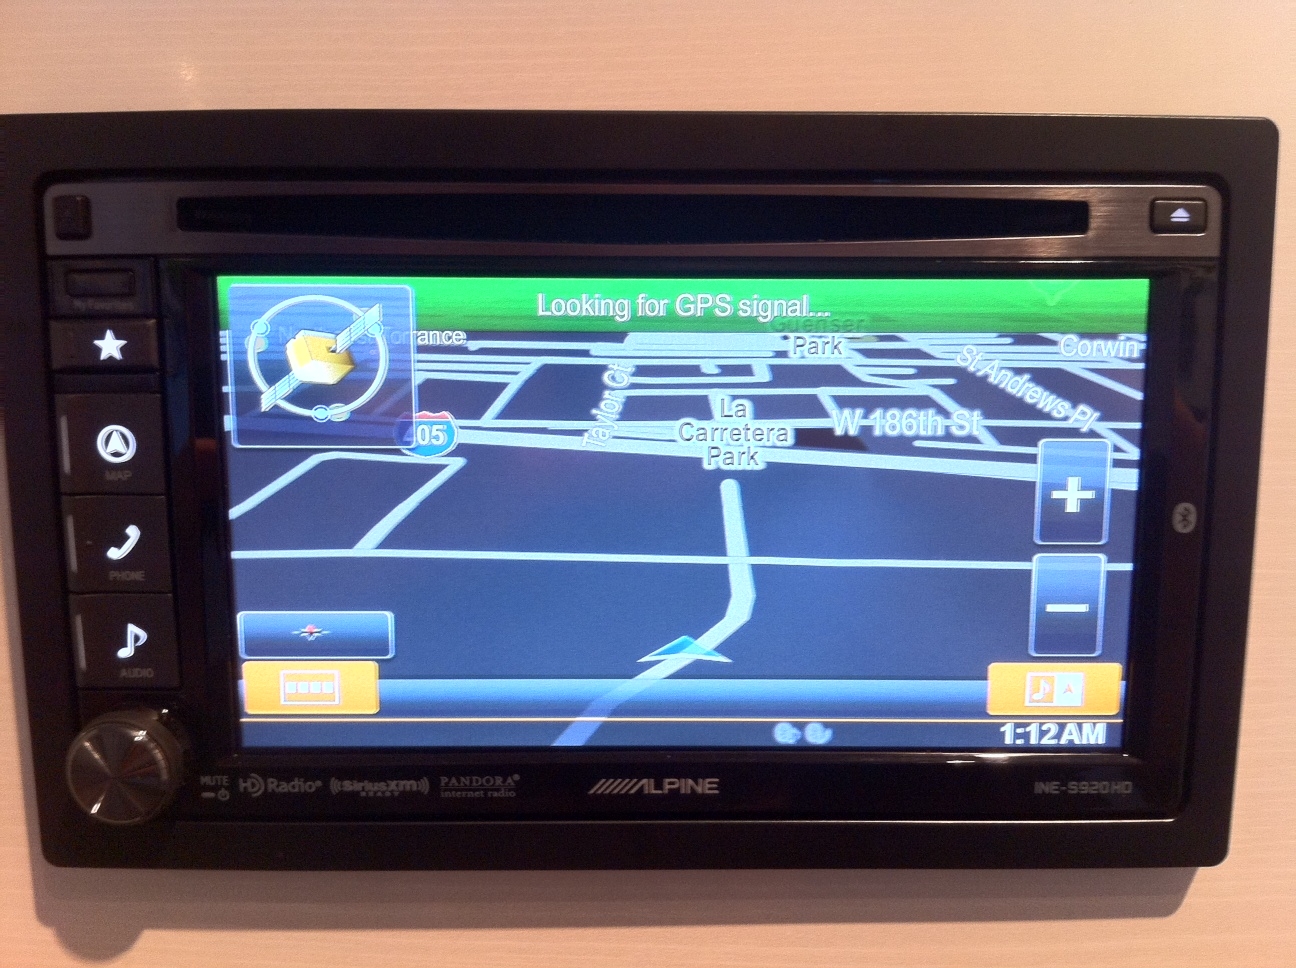 INE-S920HD Navigation in stock and on display.